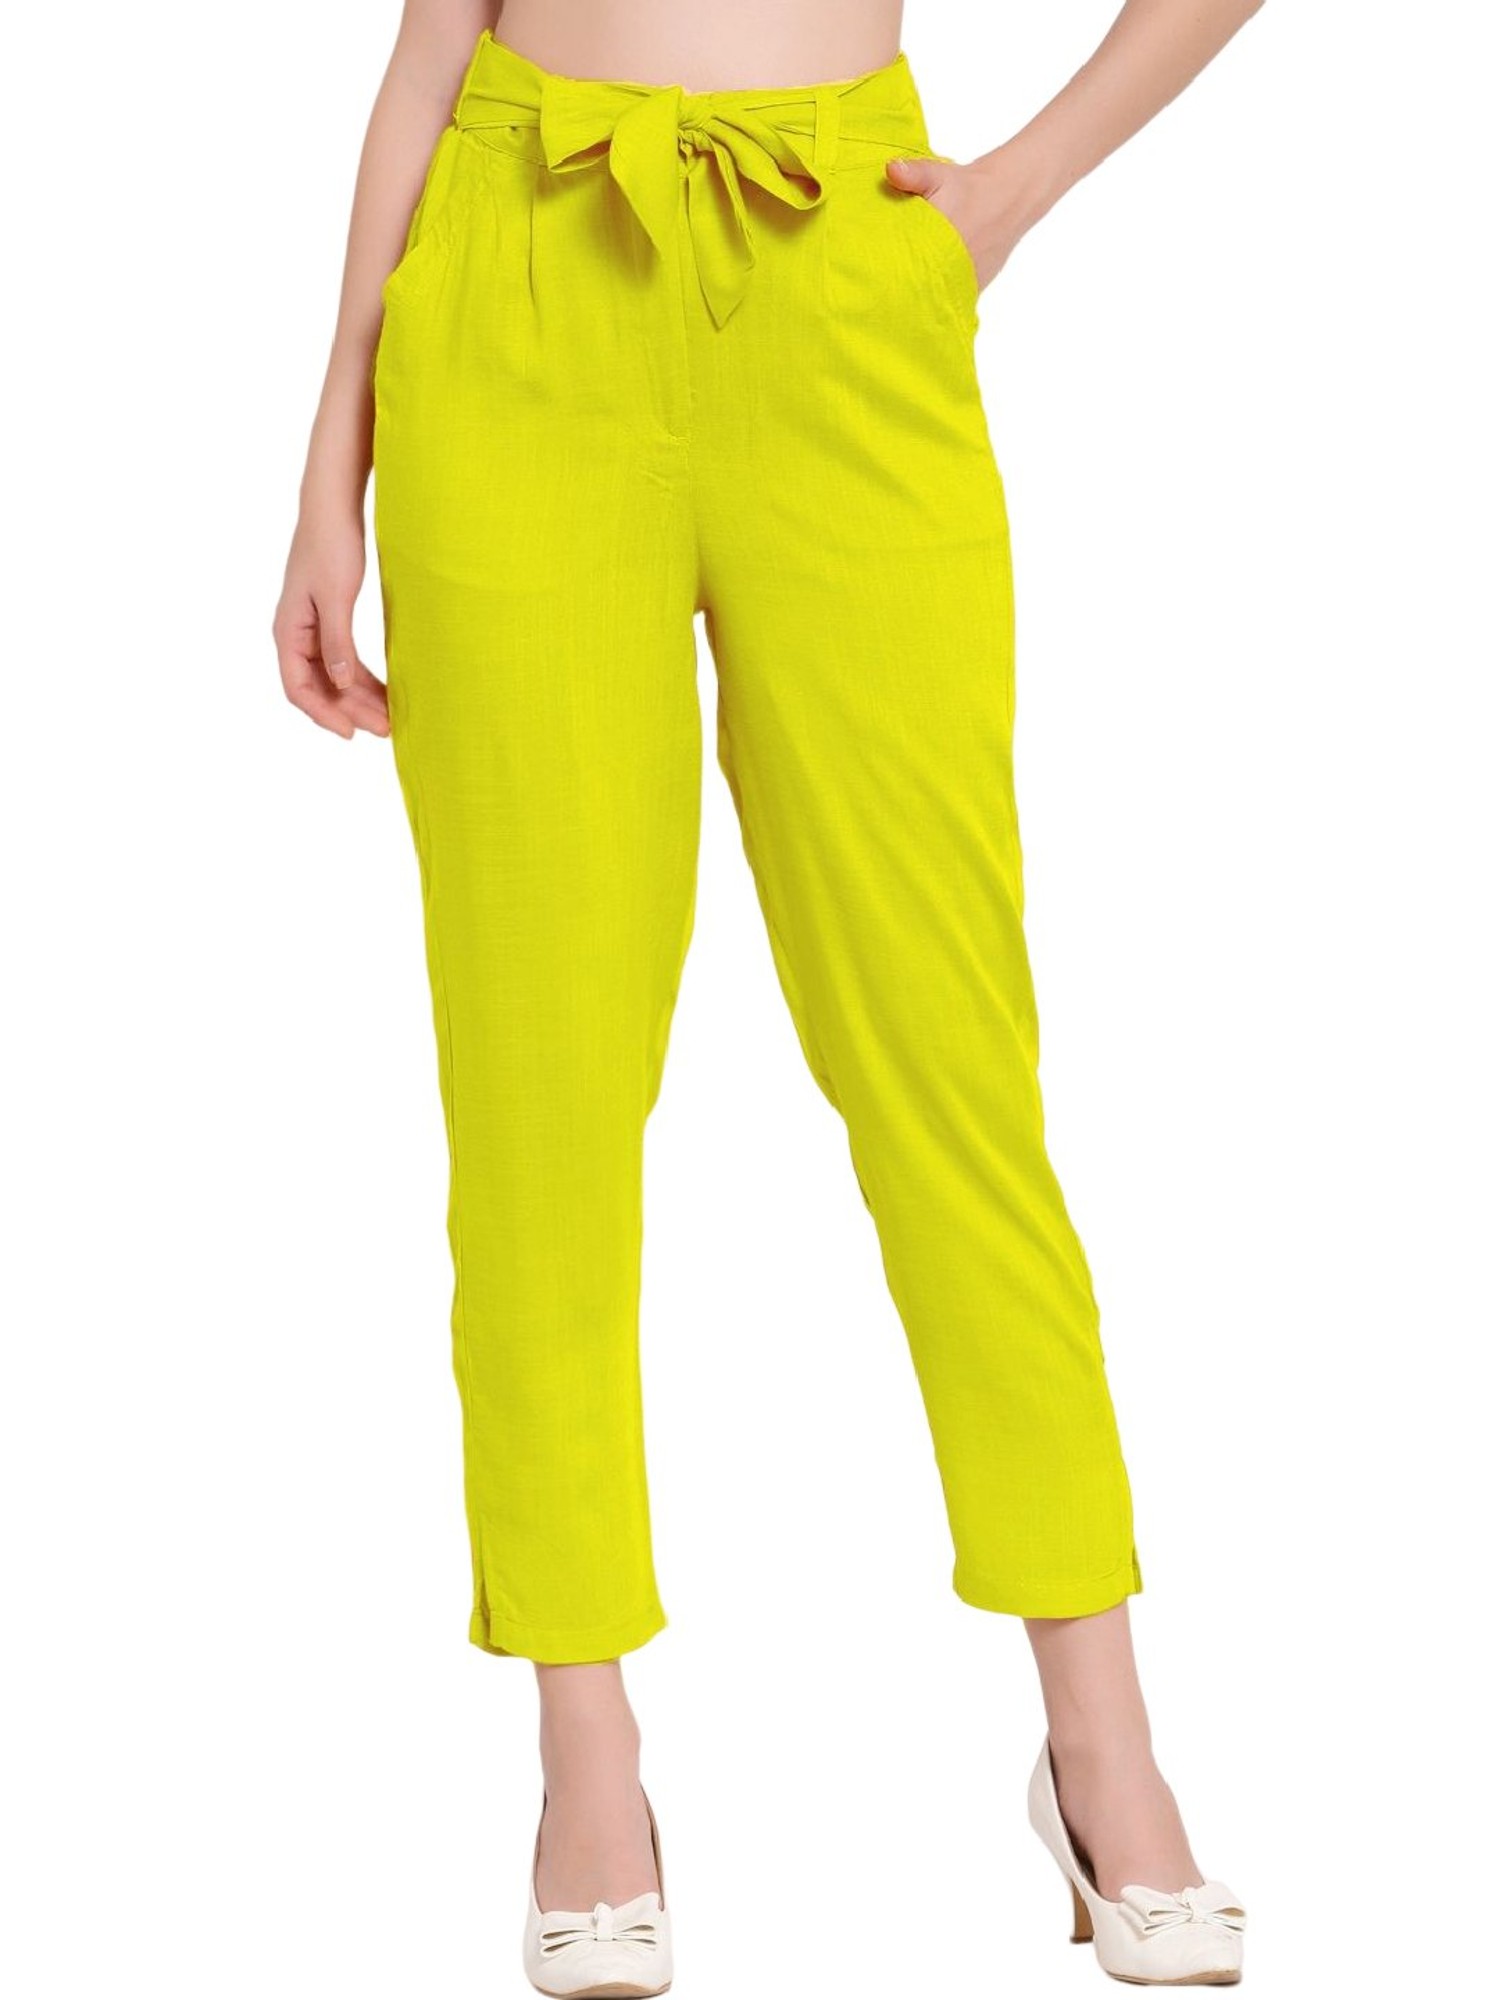 Buy Aayna Aayna Women Yellow Regular Fit Solid Cigarette Trousers at Redfynd